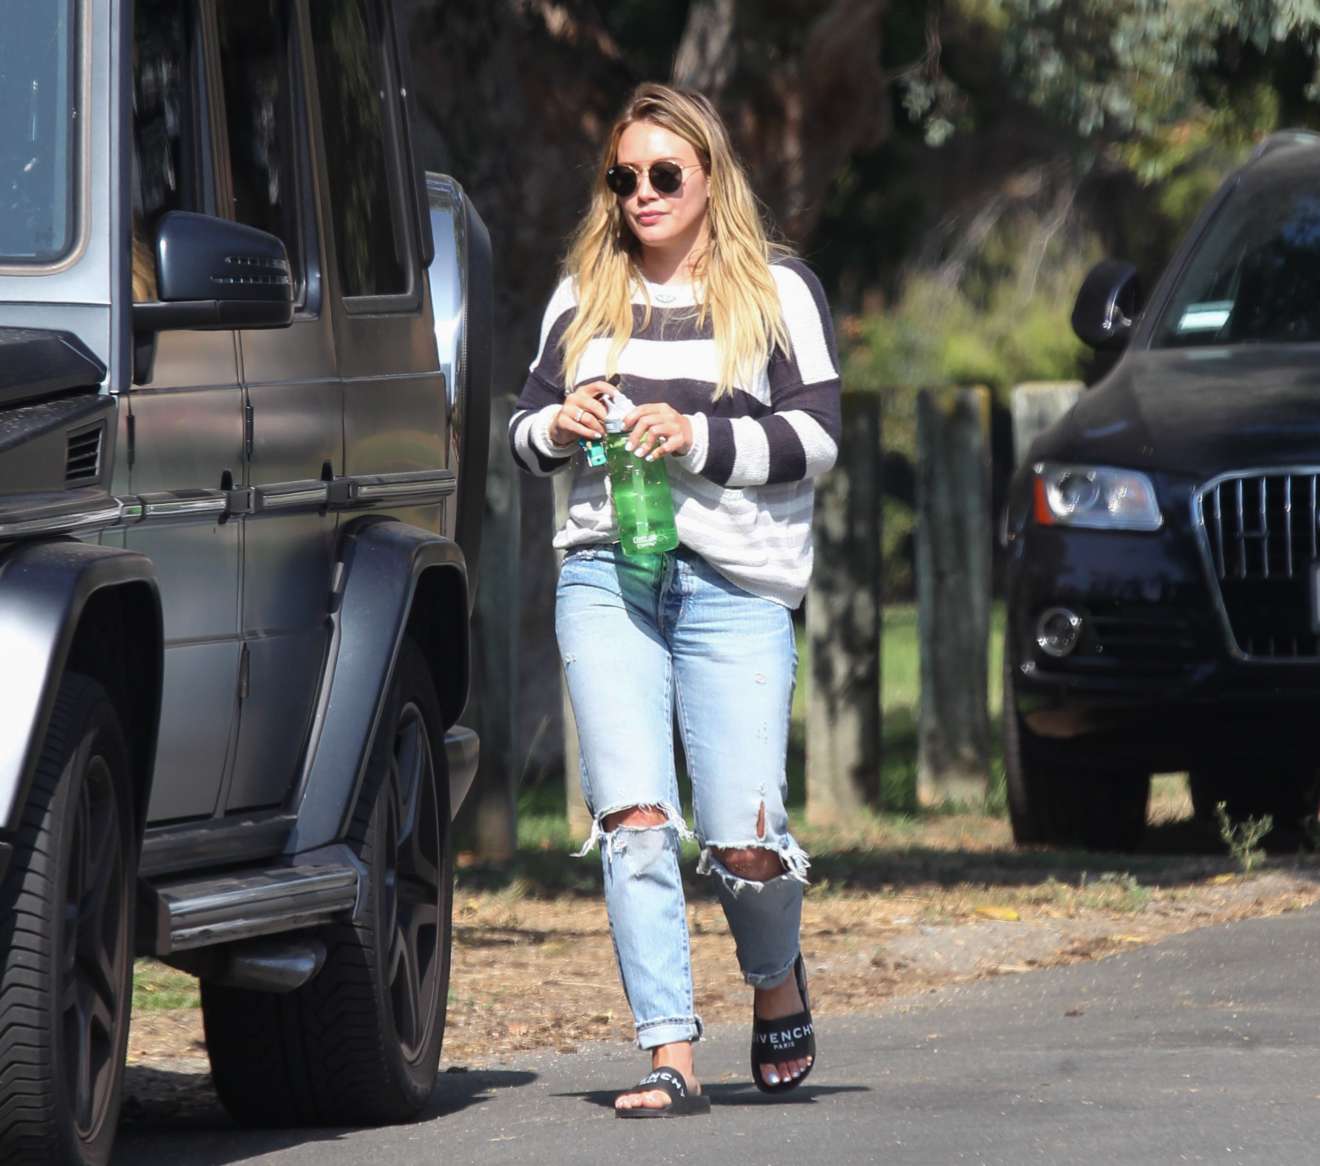 Hilary Duff - Spotted out and about in LA